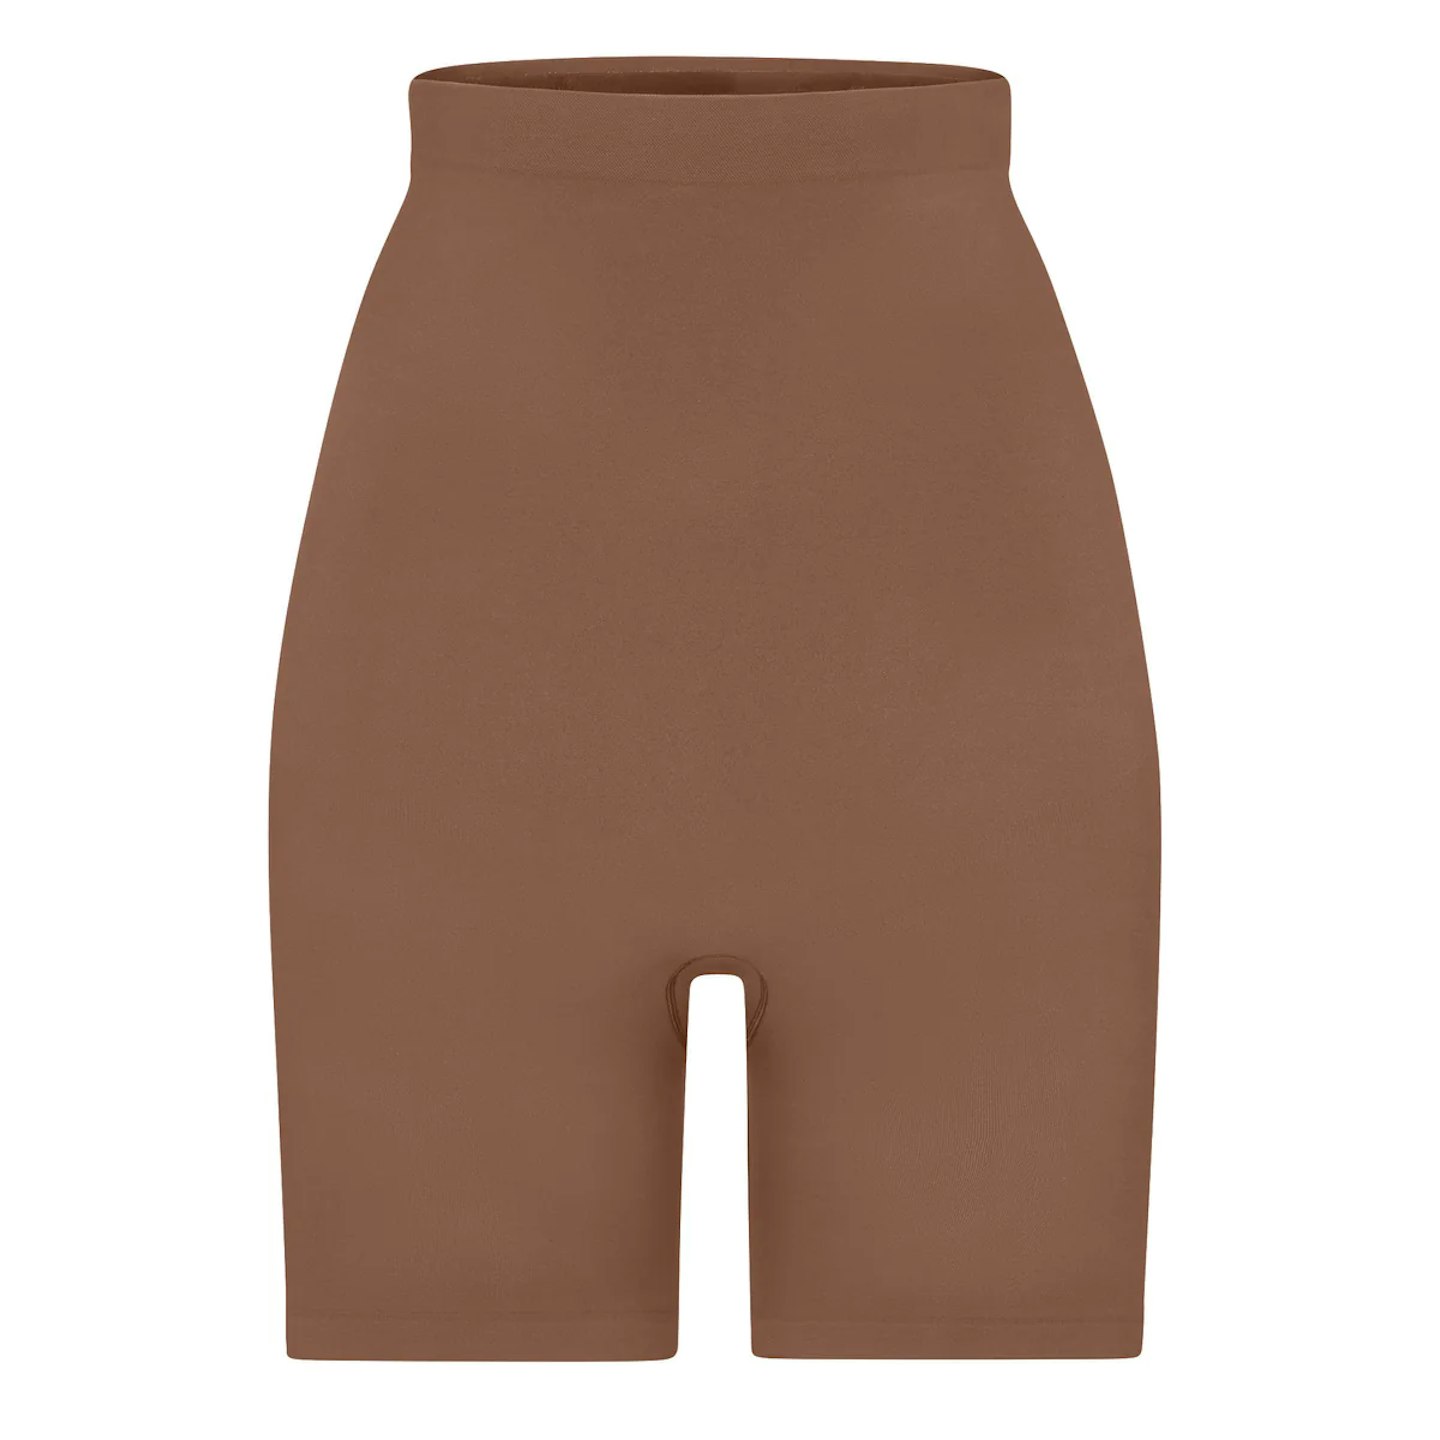 SHAPEWEAR SHORTS FOR PETITE BODY (NUDE) - ULTIMATE BY FIGUR